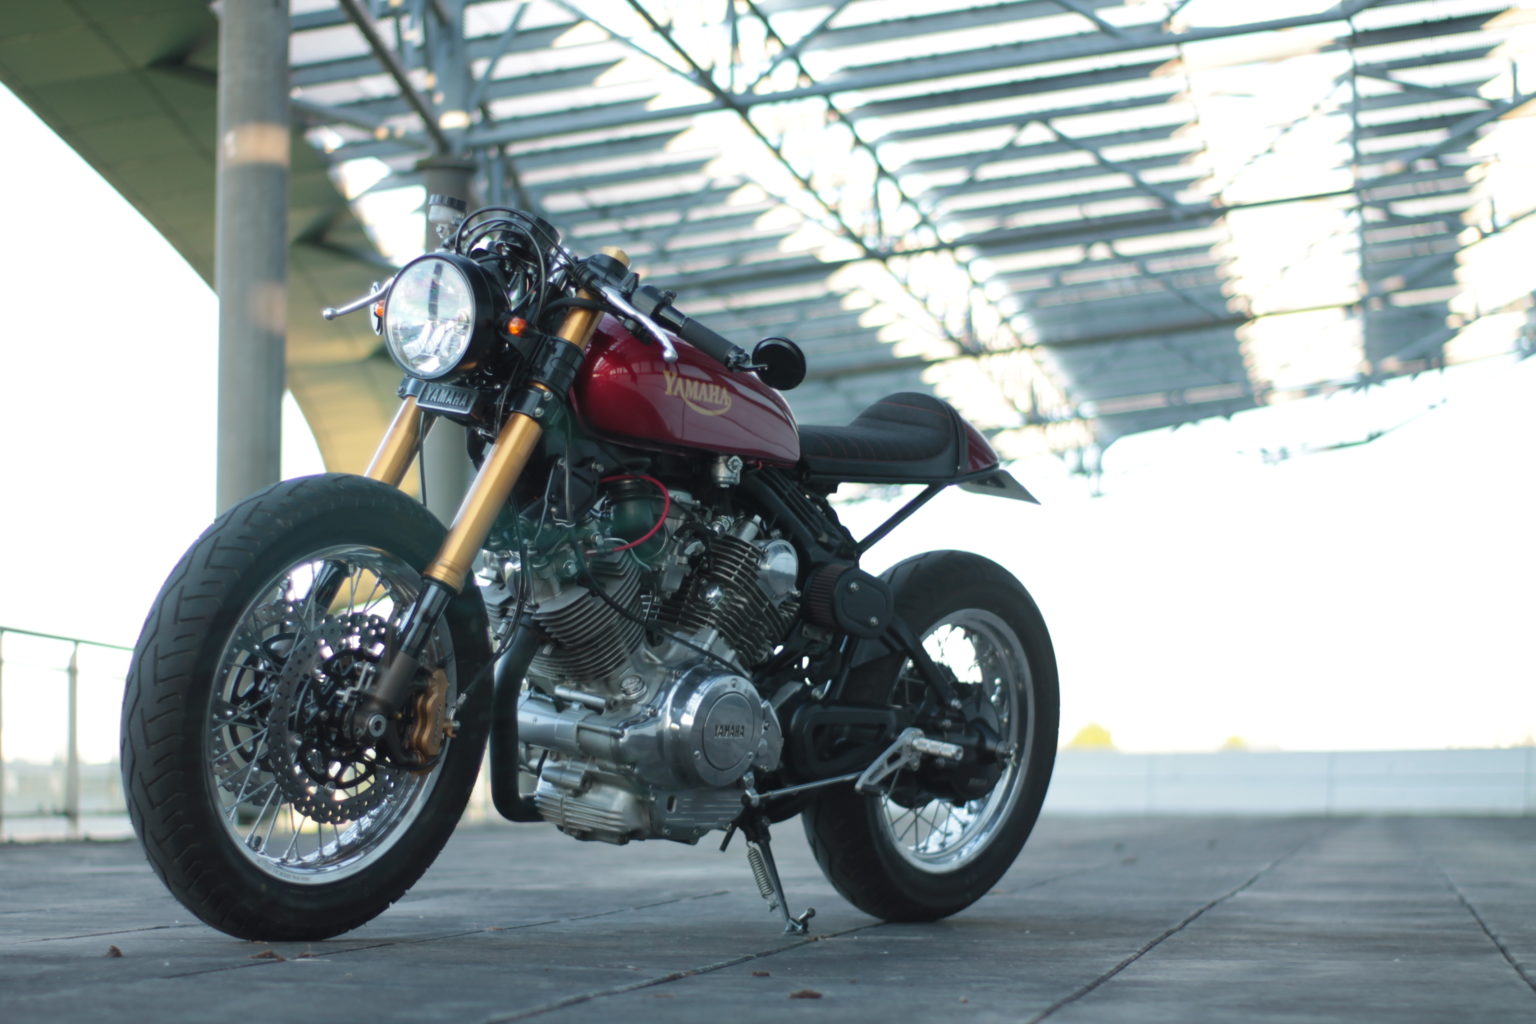 Yamaha Virago 750 by Jean-Pierre from Poitiers